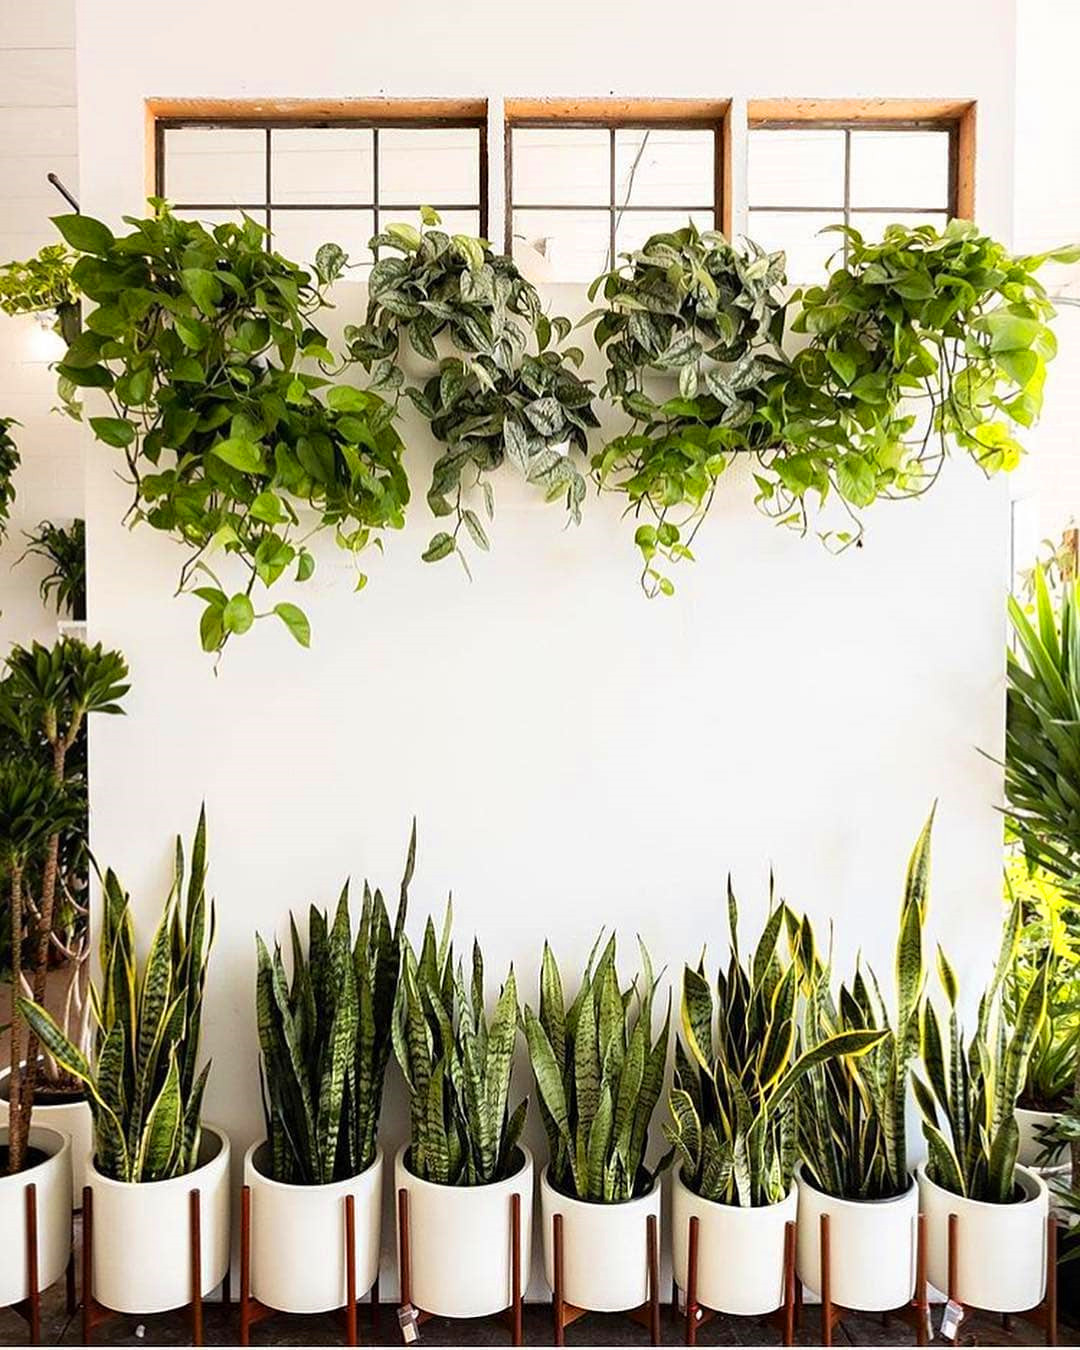 65+ Indoor Garden Ideas You Will Fall For